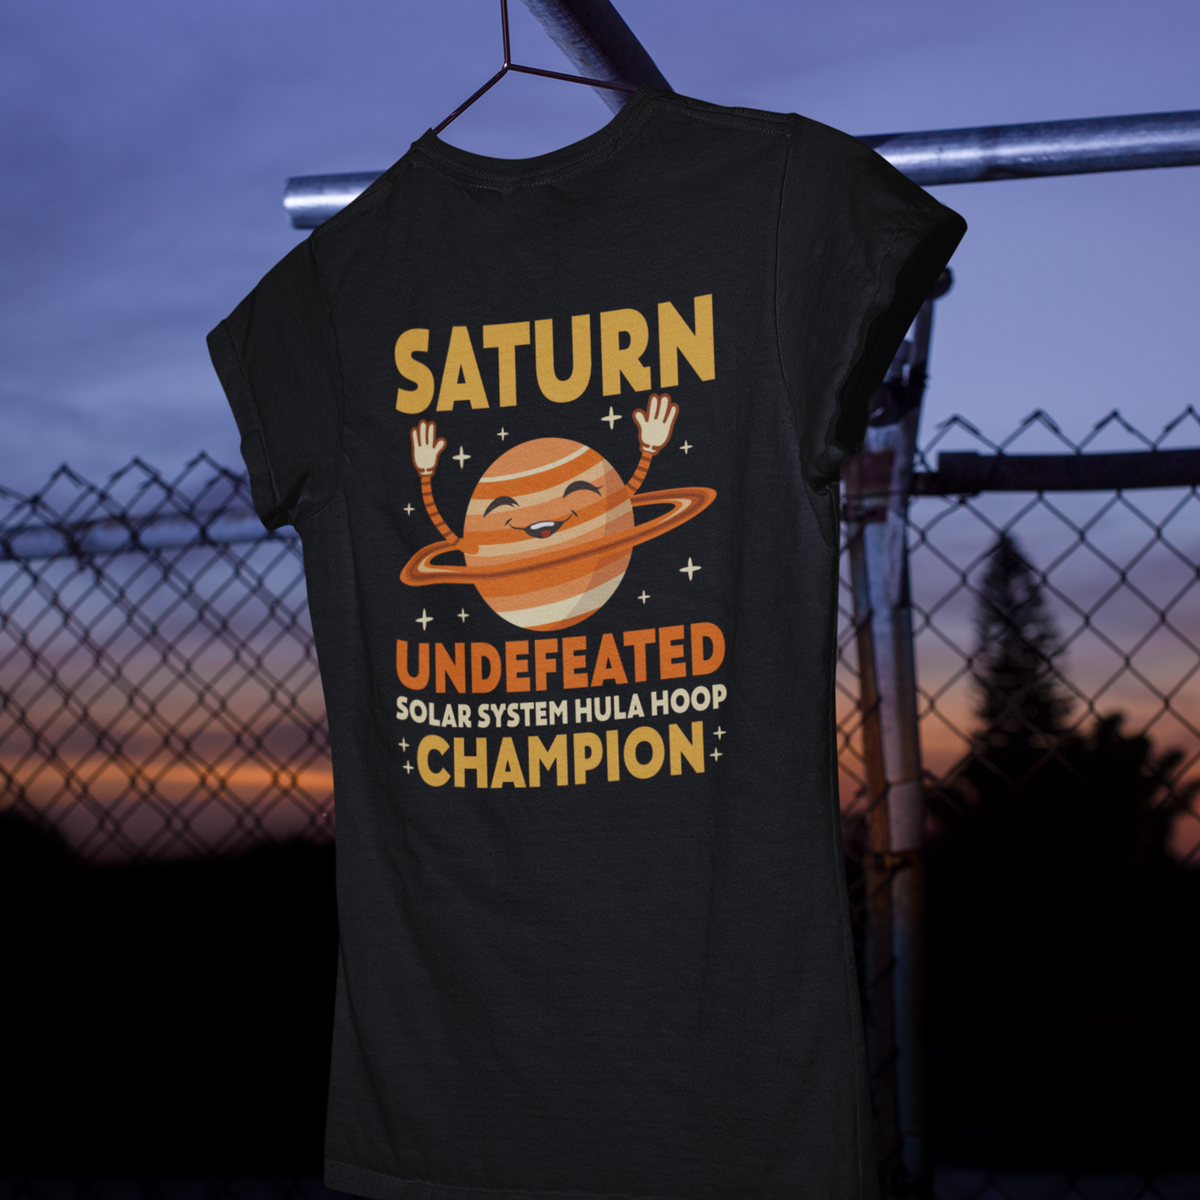 Funny Saturn Solar System Hula Hoop Shirt | Astronomy Science Shirt | Women's Slim-fit Soft Style Tee